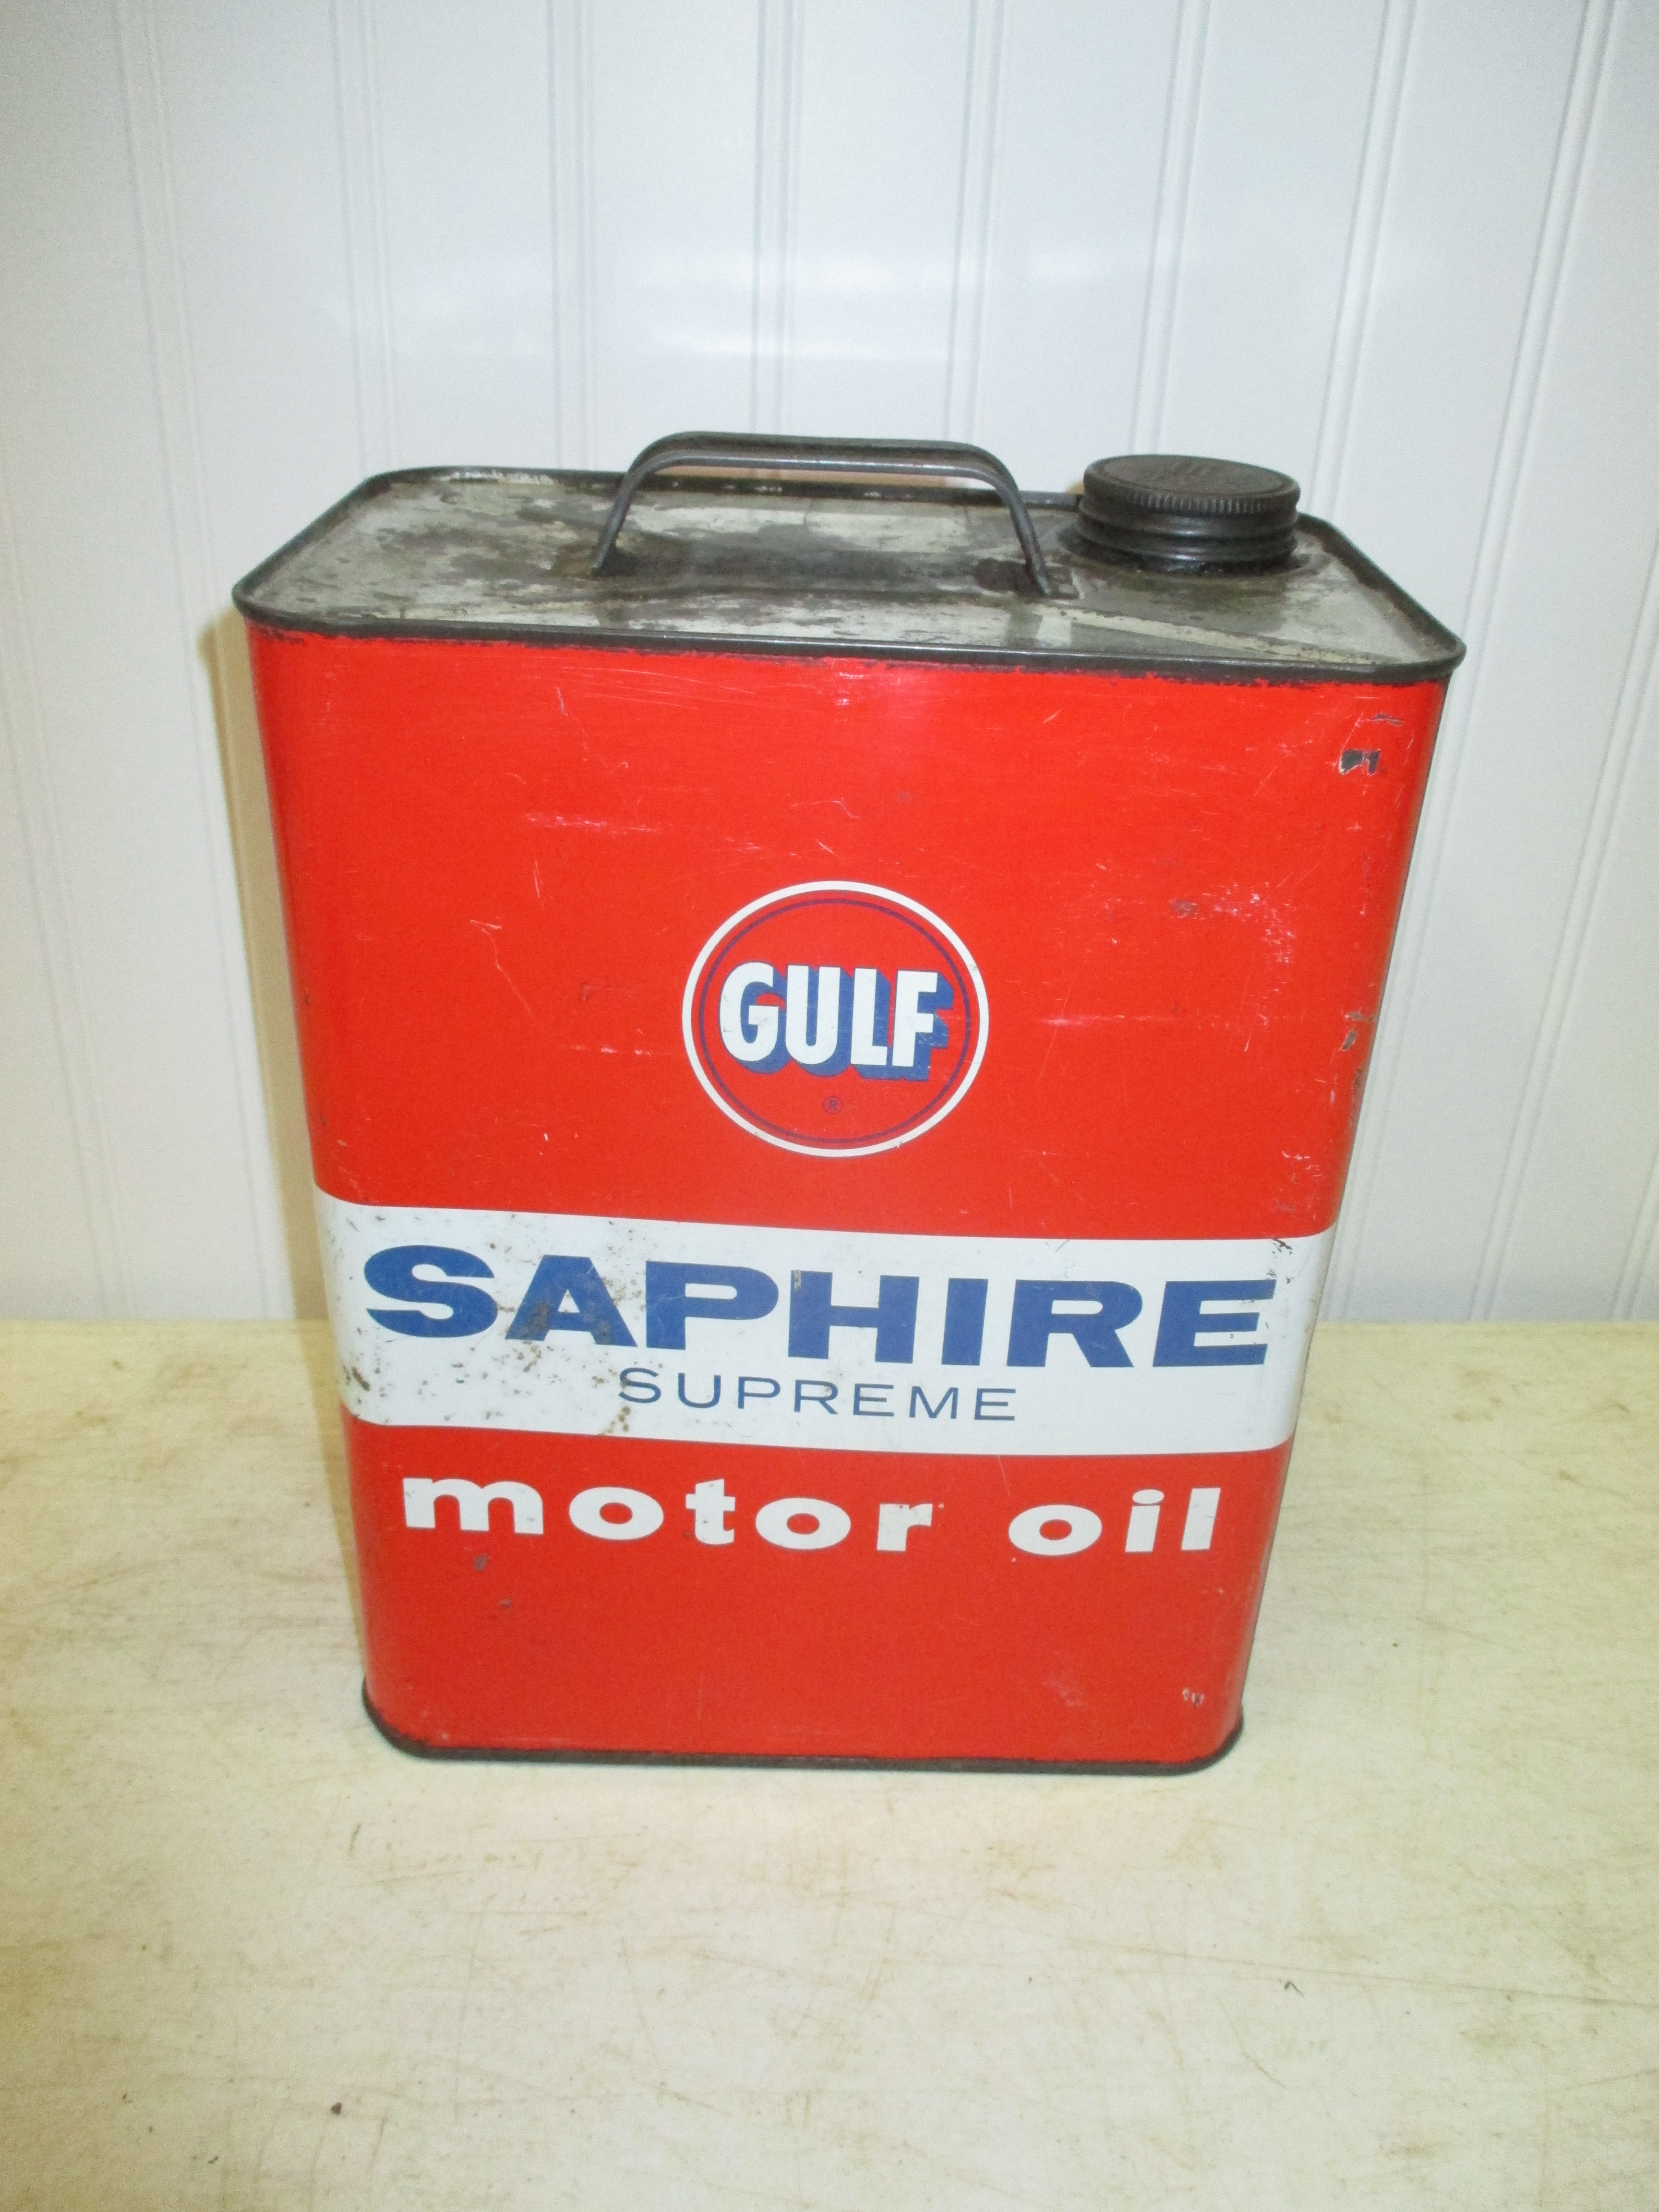 Gulf Saphire Oil Can